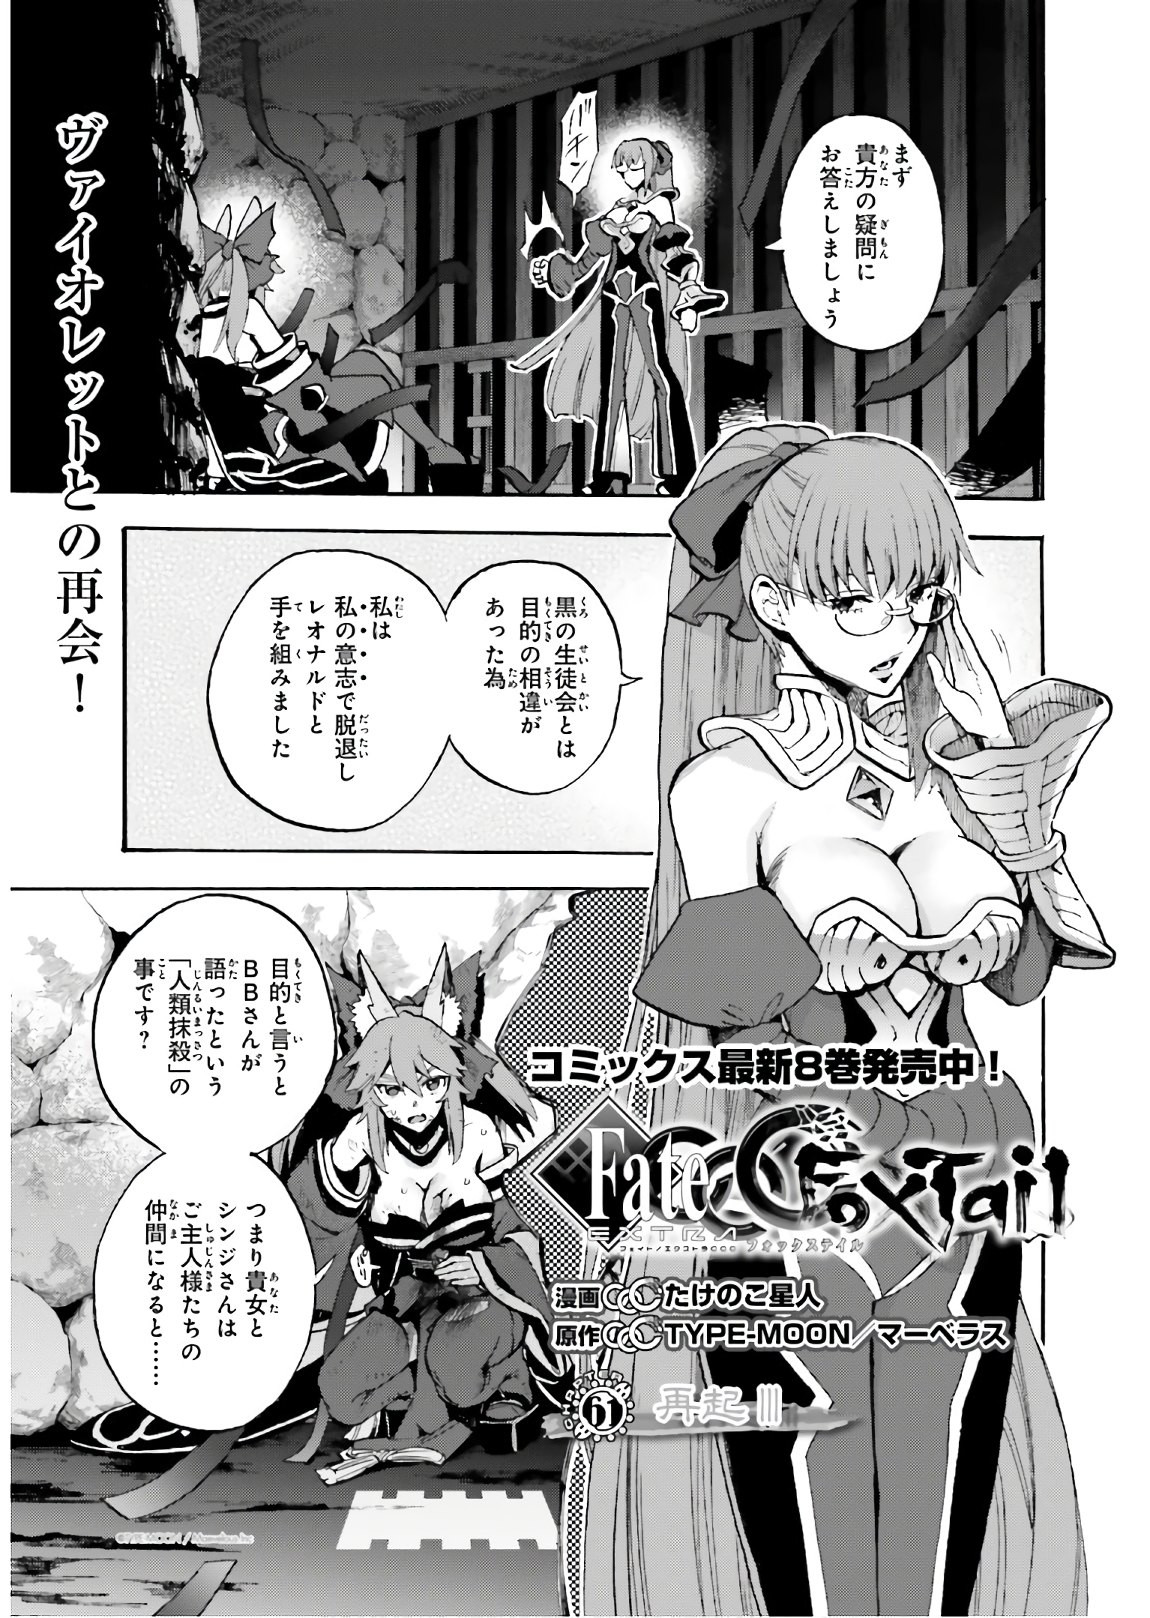 Fate Extra Ccc Fox Tail Chapter 61 Page 1 Raw Manga 生漫画